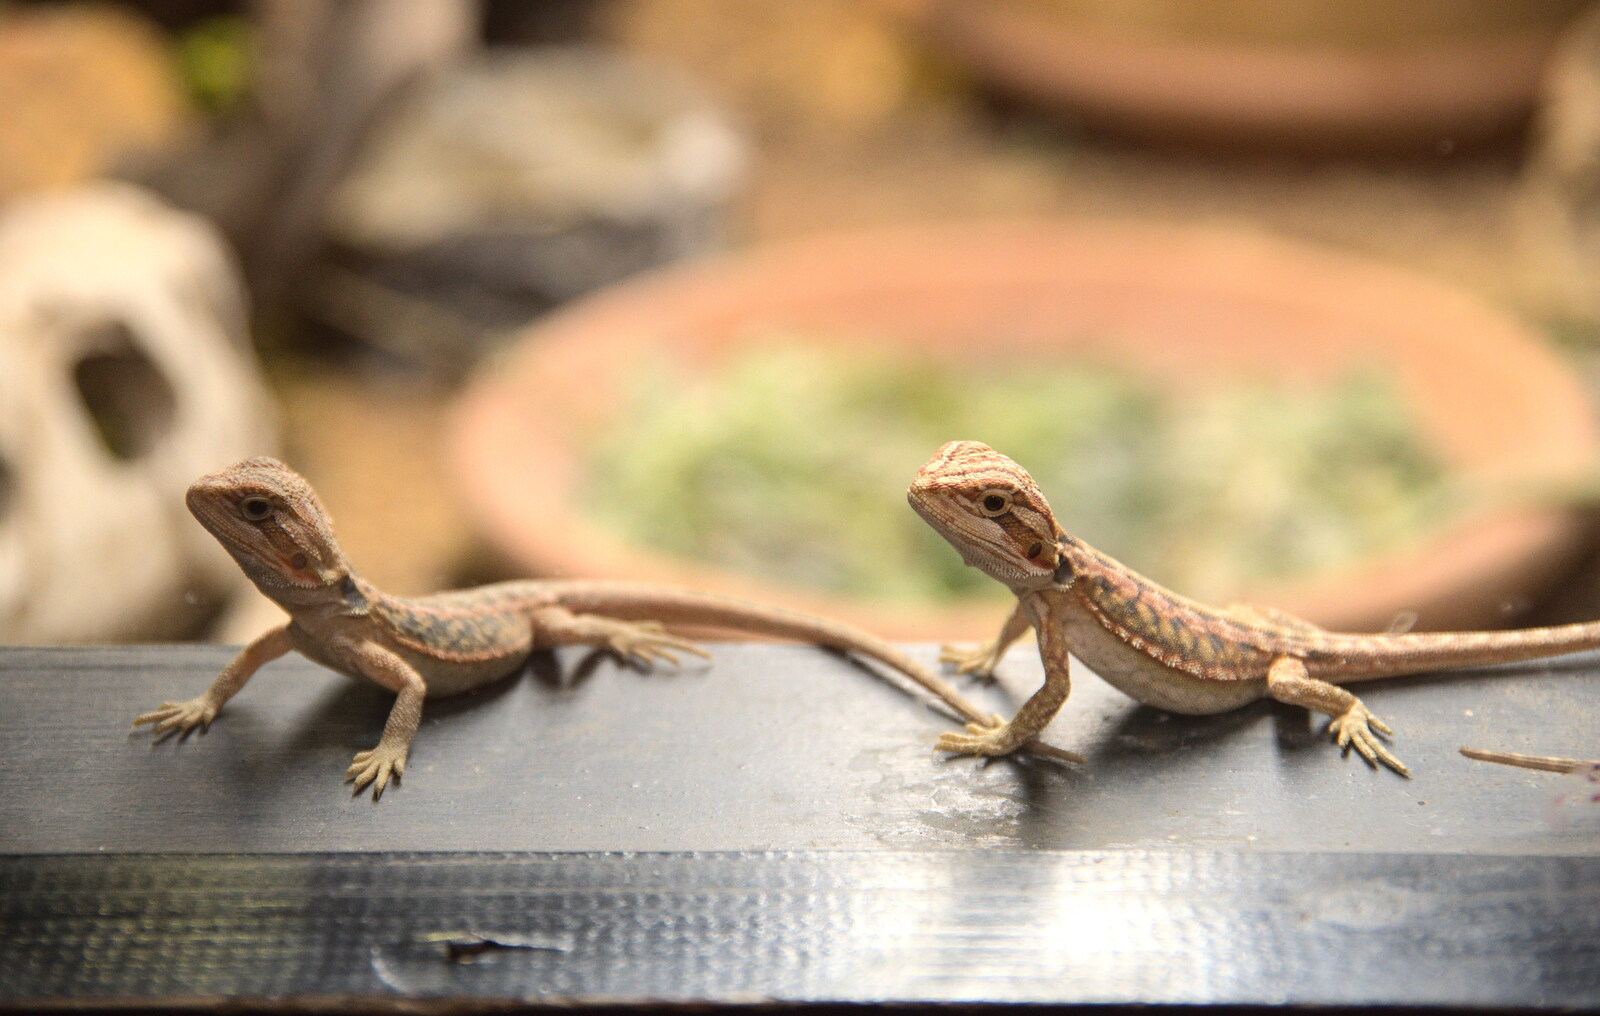 A pair of cute lizards from The BSCC at Burston and The Legend of Swallow Aquatics, East Harling, Norfolk - 15th May 2022